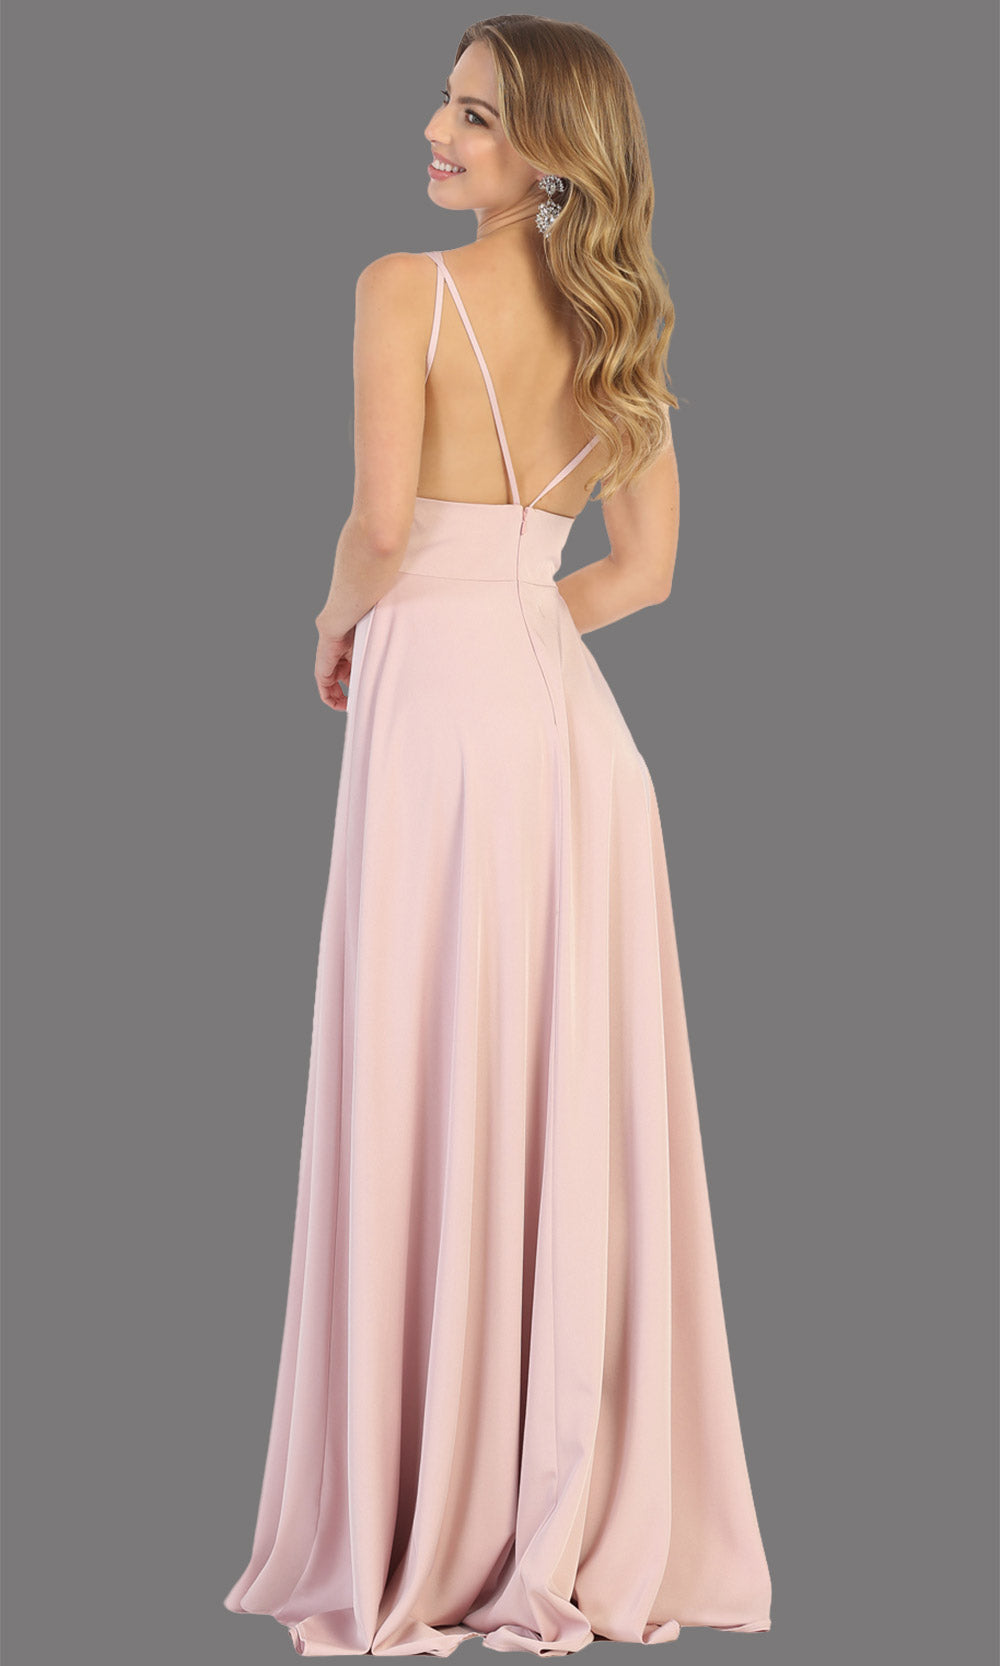 Mayqueen MQ1704 long dusty rose flowy satin dress with high slit and straps. This light pink dress is perfect for bridesmaid dresses, simple wedding guest dress, prom dress, gala, black tie wedding. Plus sizes are available, evening party dress back